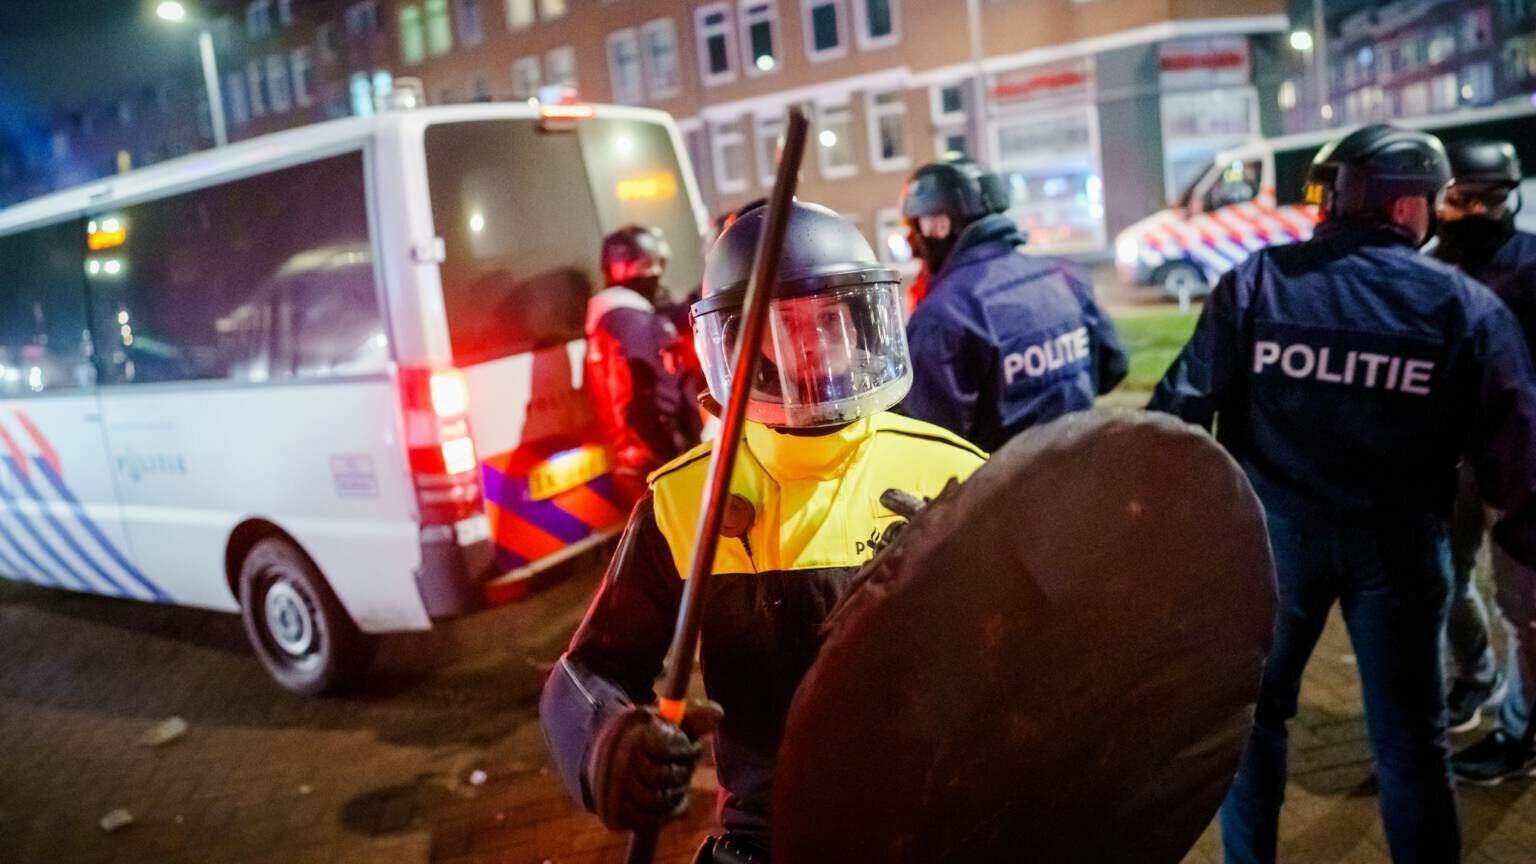 Residents of the Netherlands massively protest against curfew